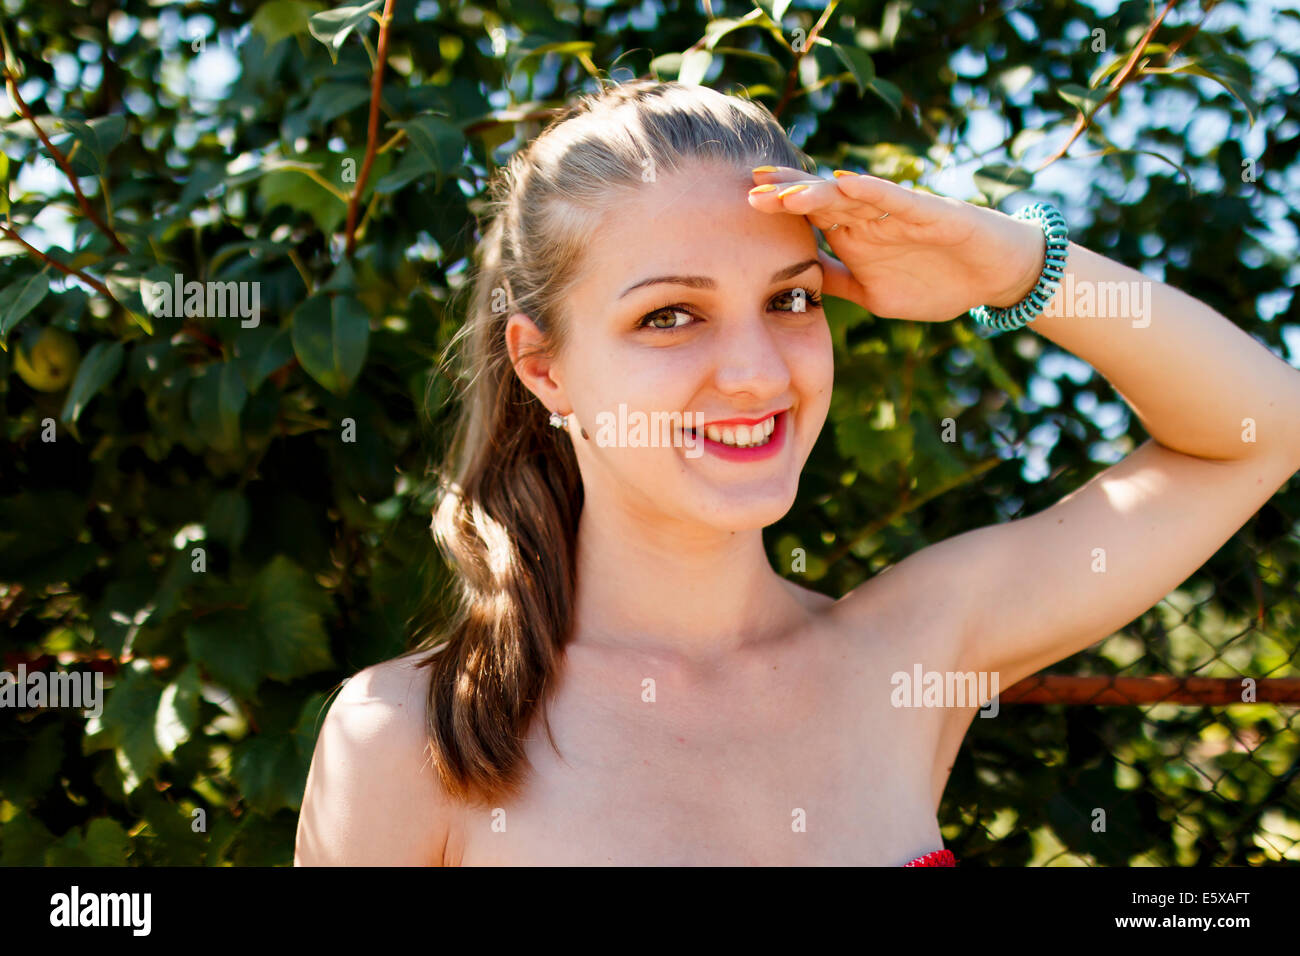 young beautiful happy woman blond at nature, looking forward Stock Photo